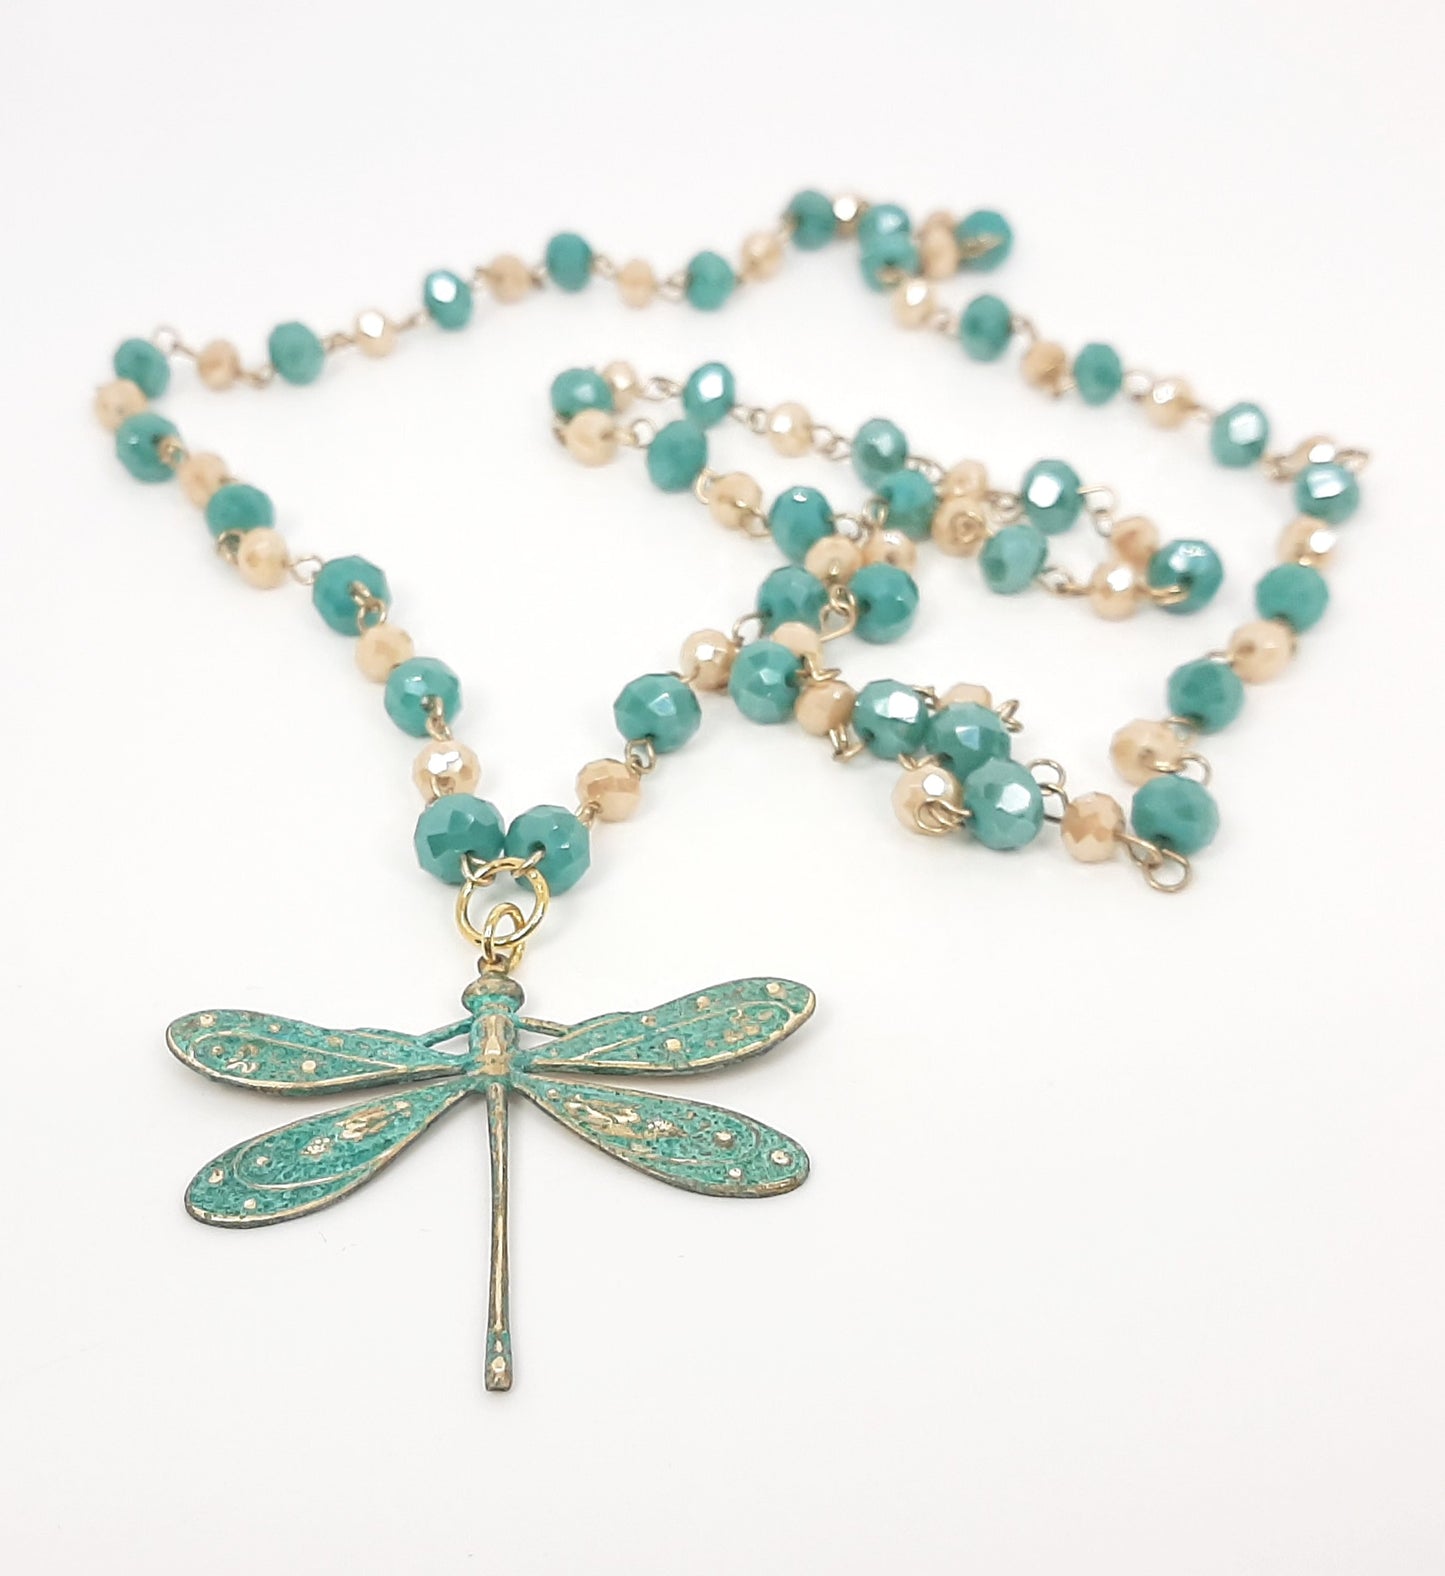 Dragonfly Patina Pendant Necklace + Shimmering Handmade Chain